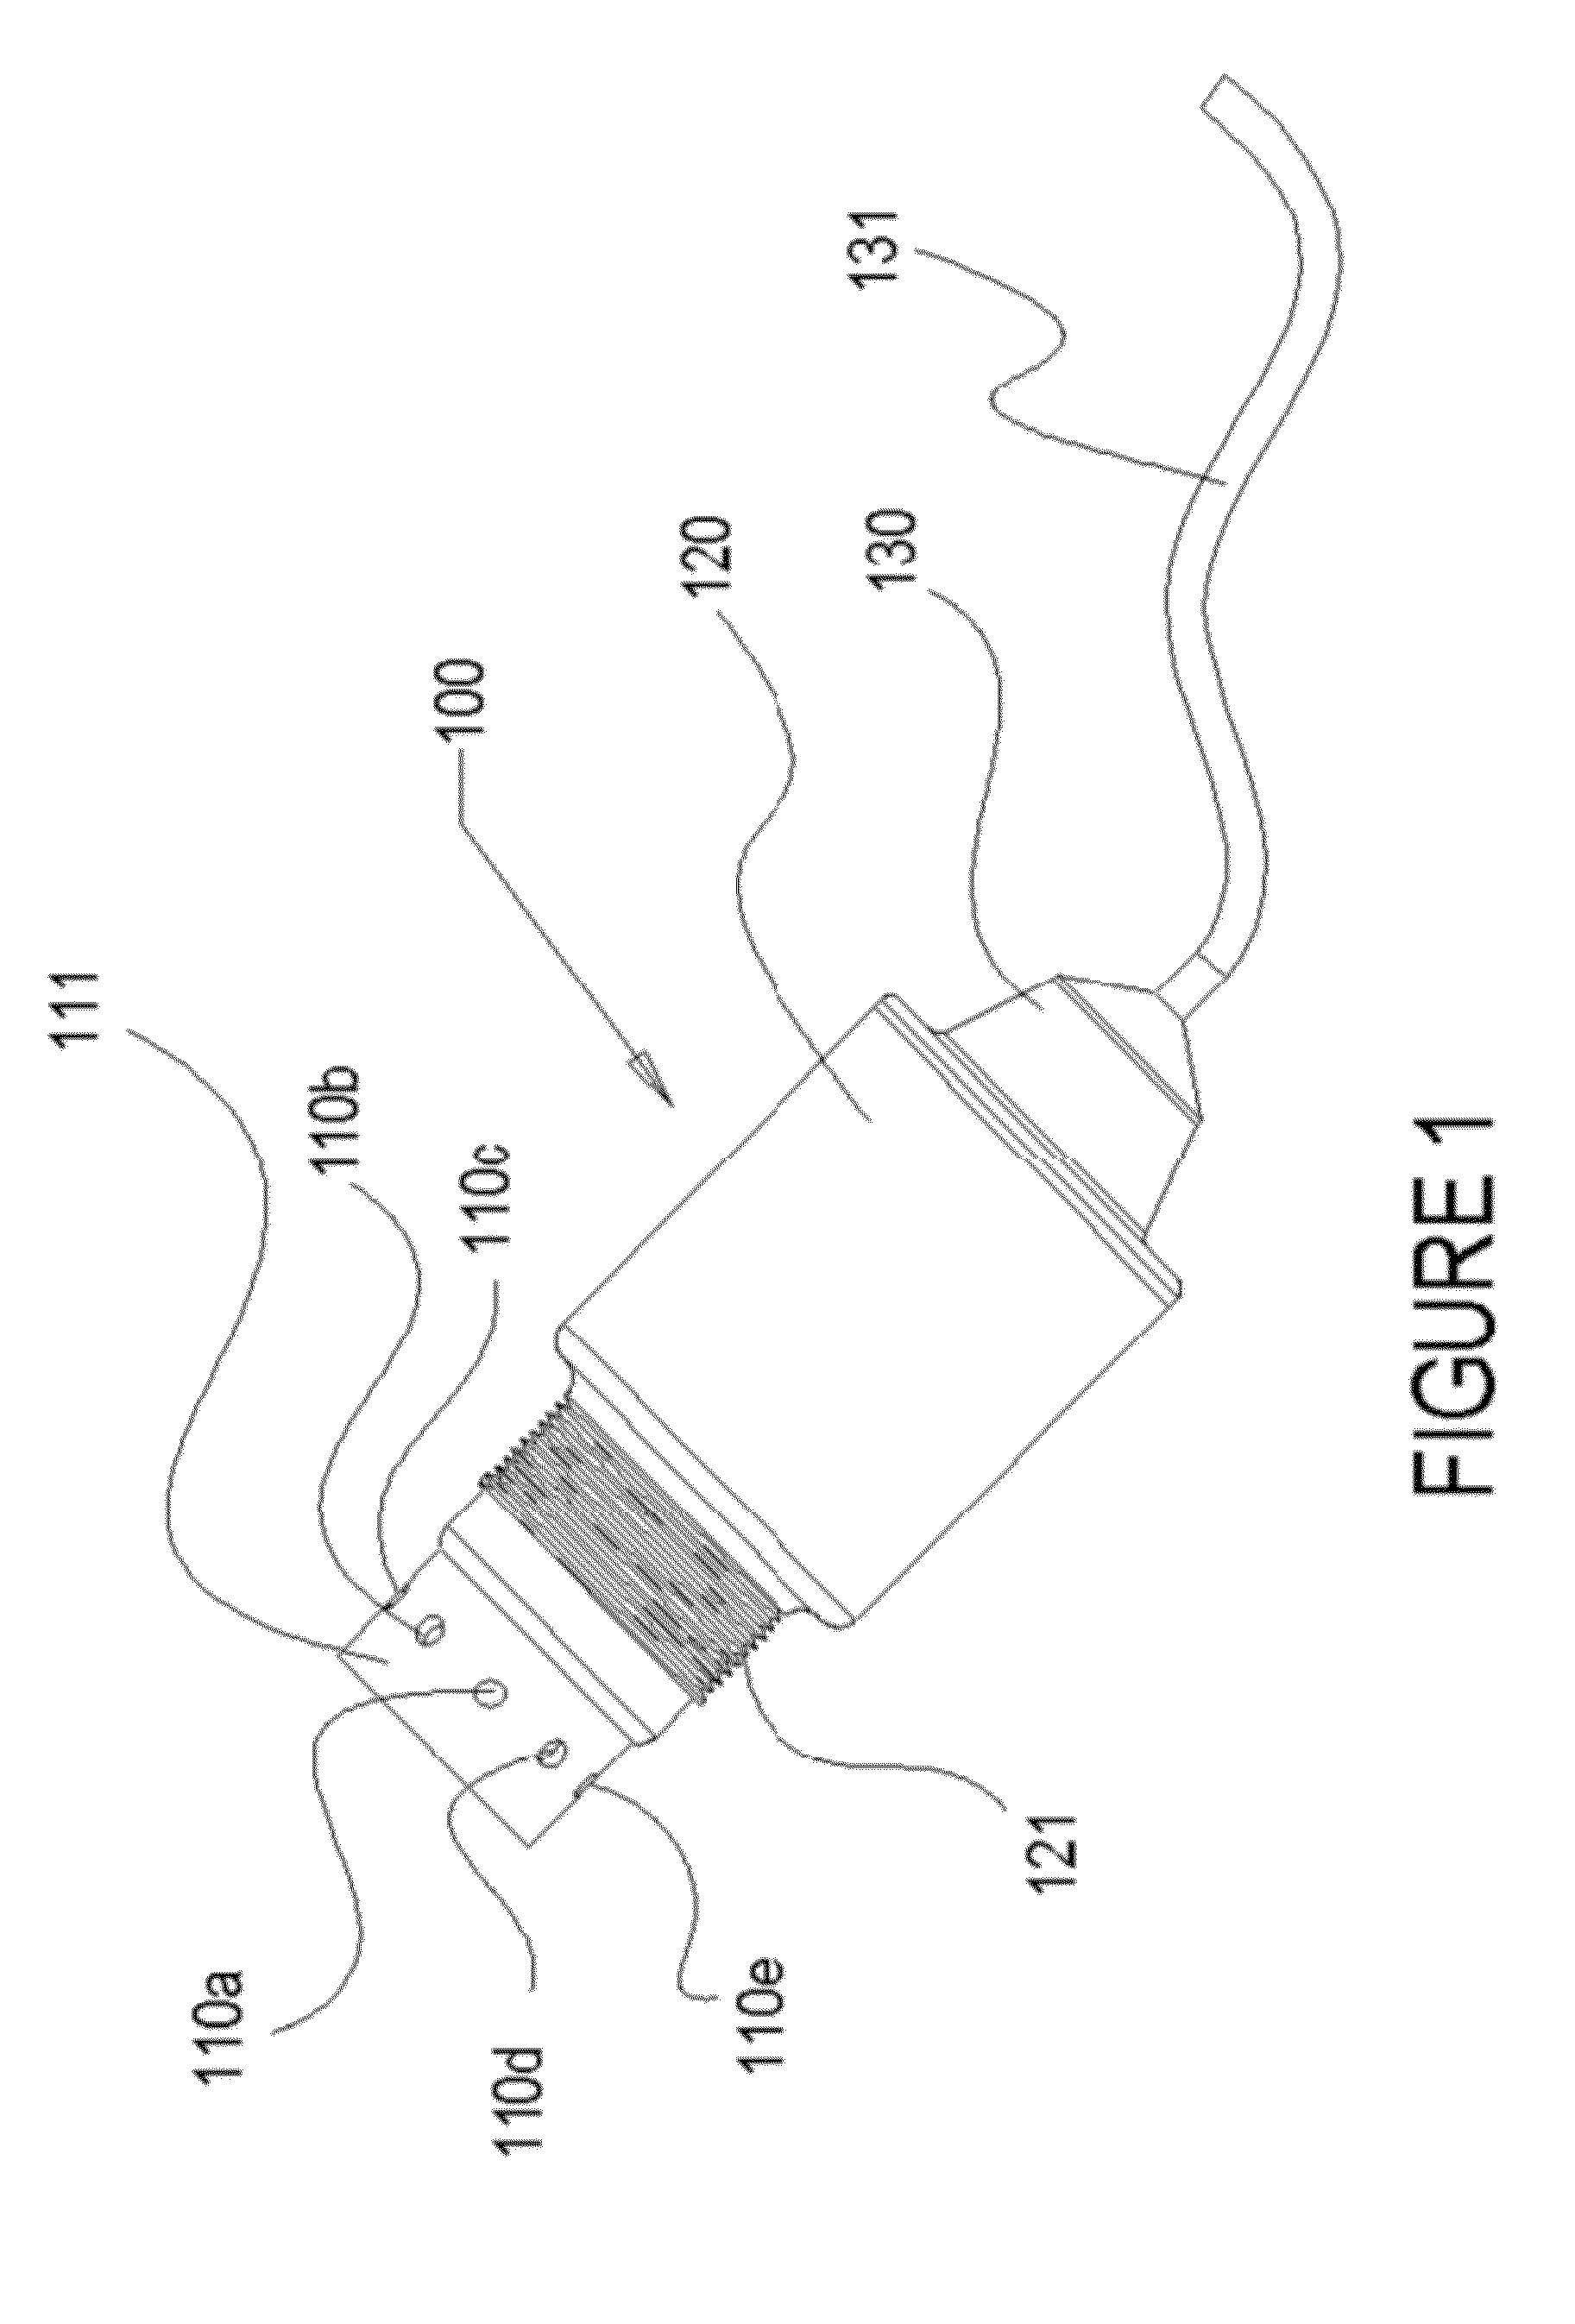 Method and apparatus for in-situ measurement of soot by electron spin resonance (ESR) spectrometry